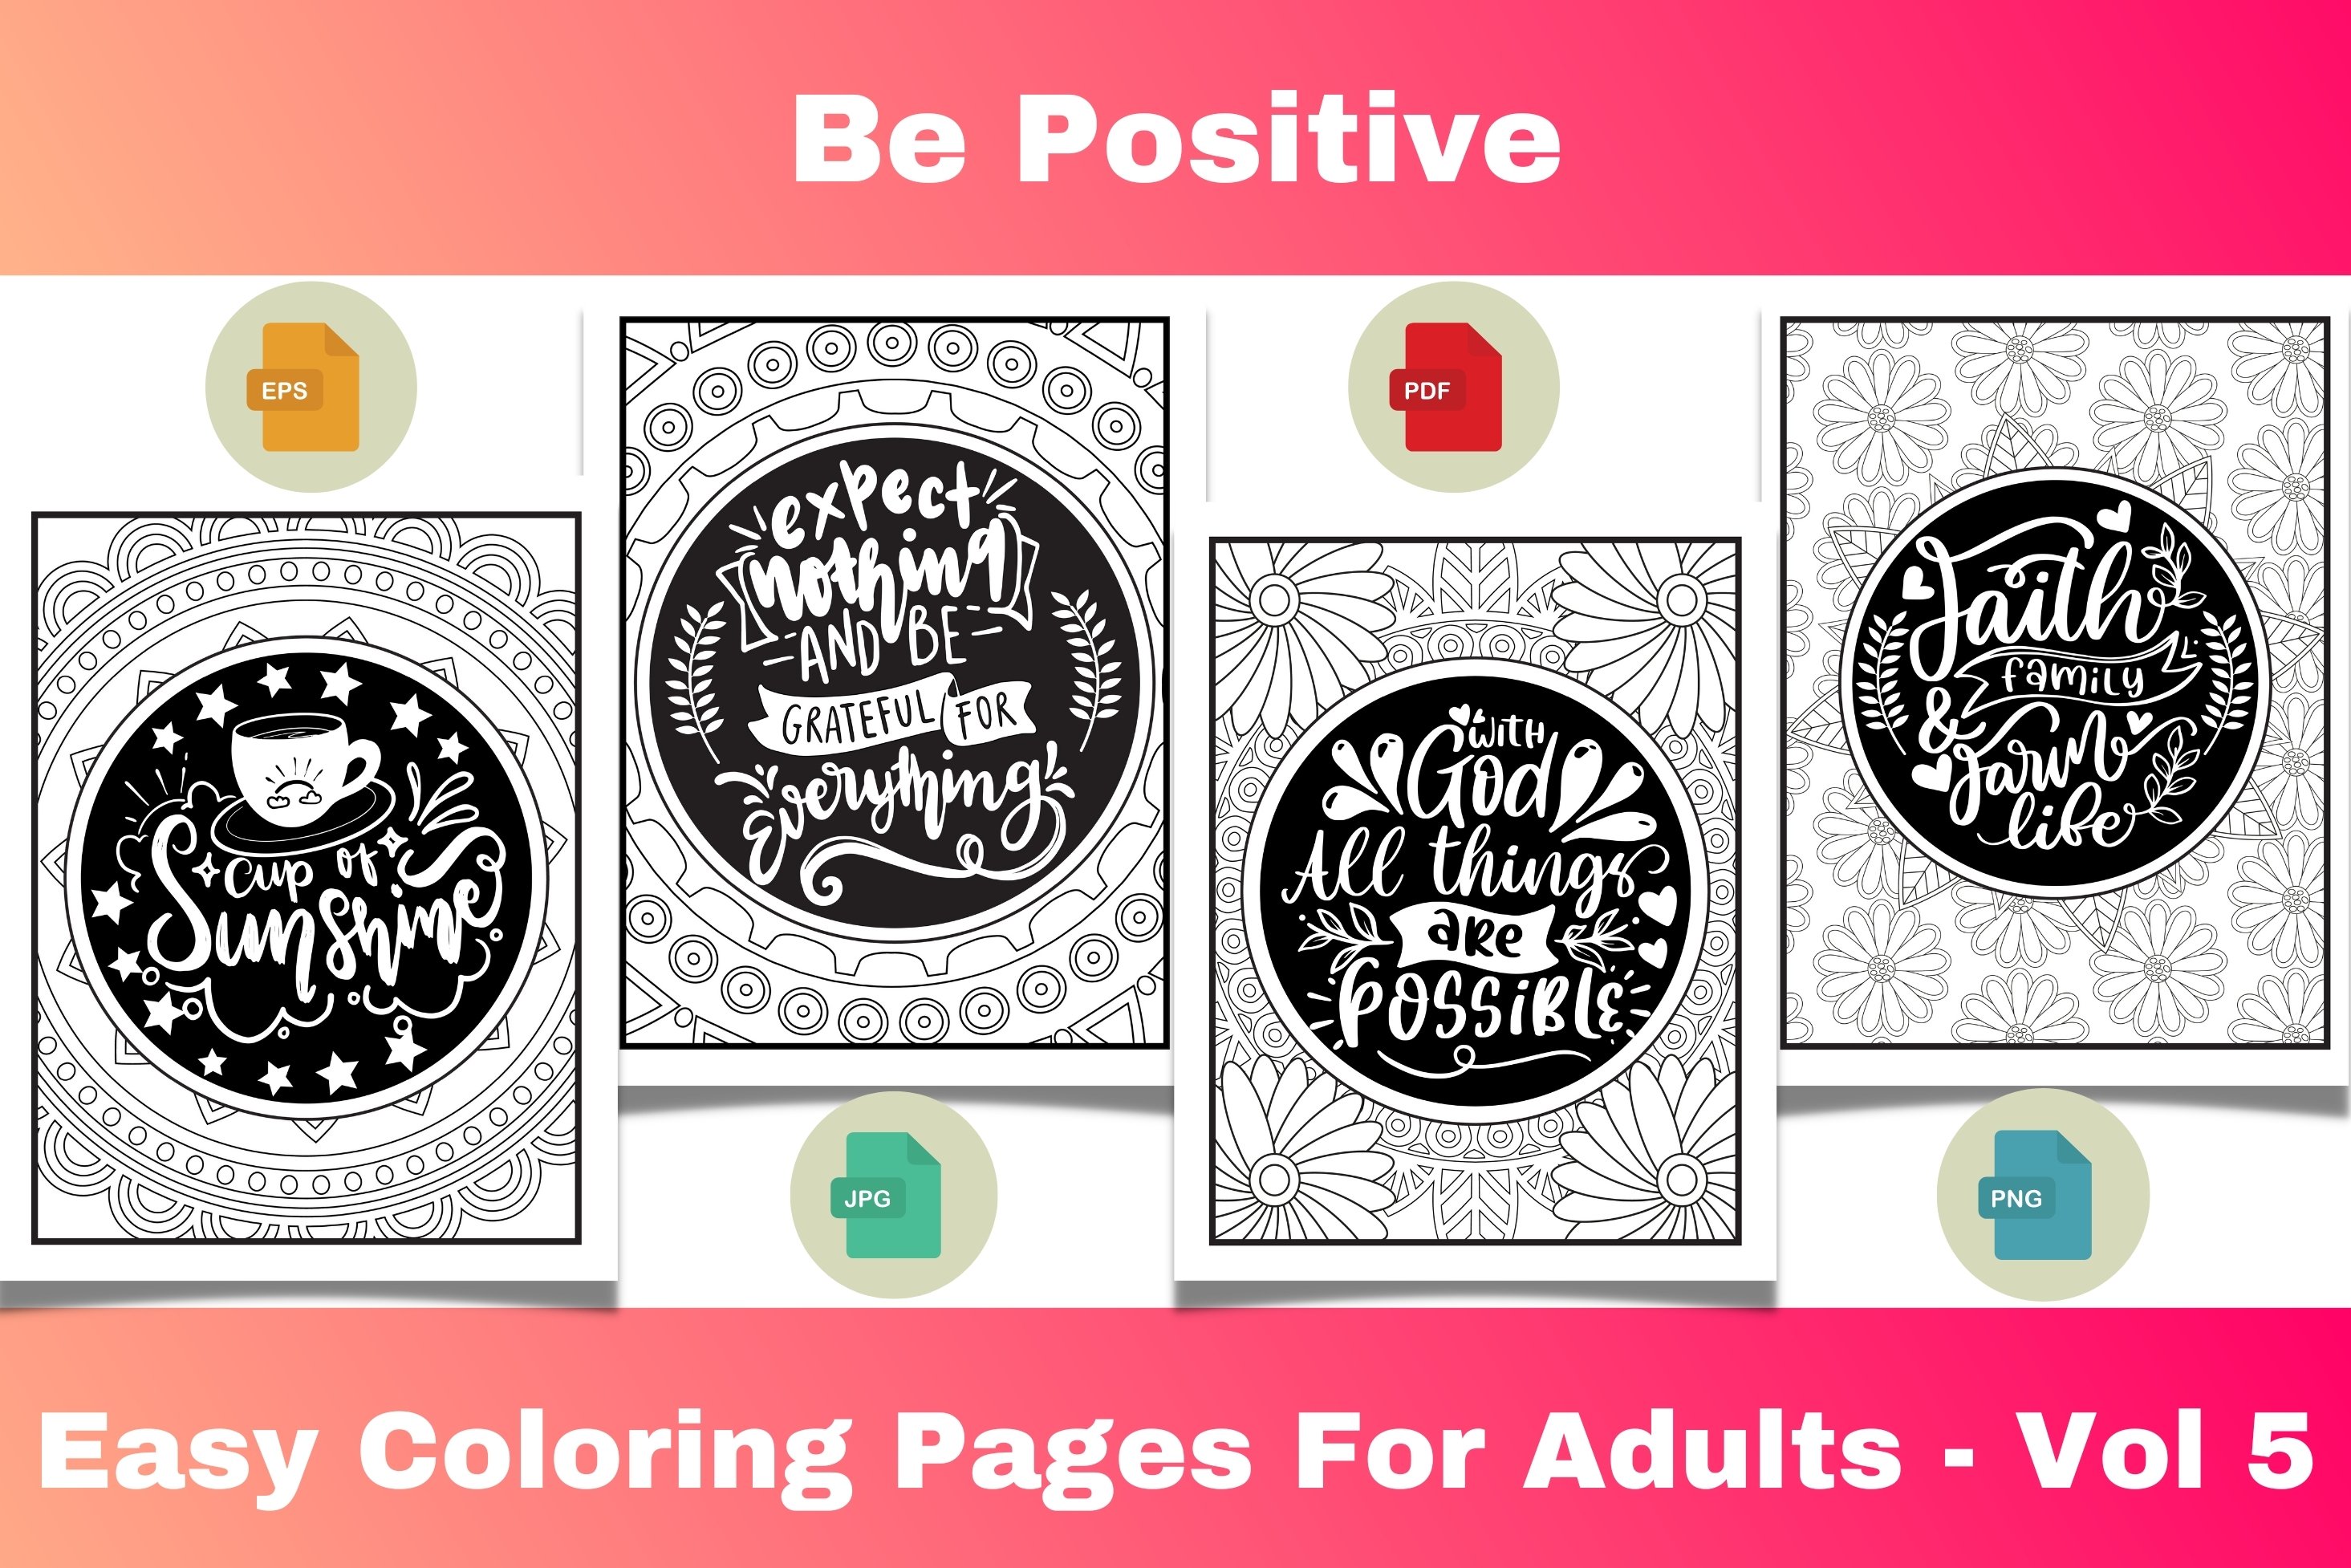 Be positive easy coloring pages for adults